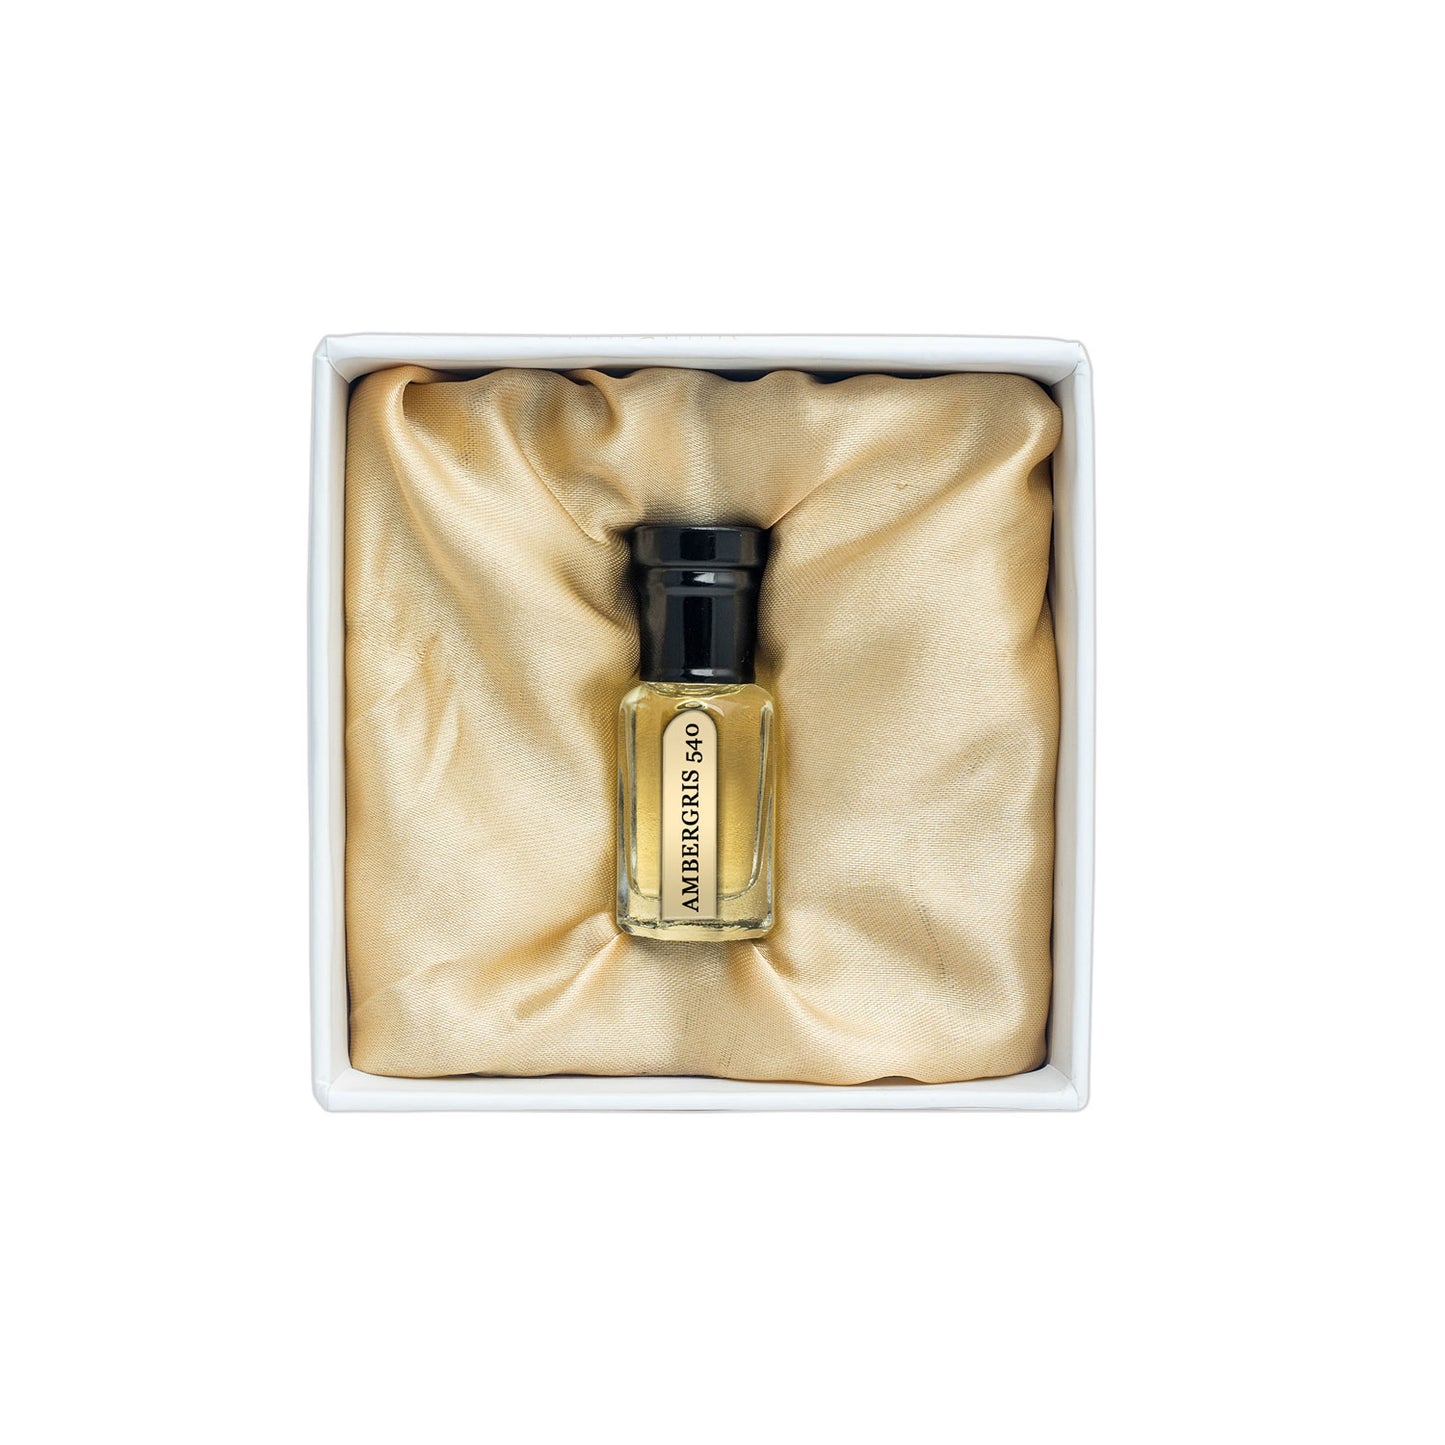 Amber/Ambergris Pure Perfume Oil - Pure Ambergris Oil A Grade – Sultan  Fragrances